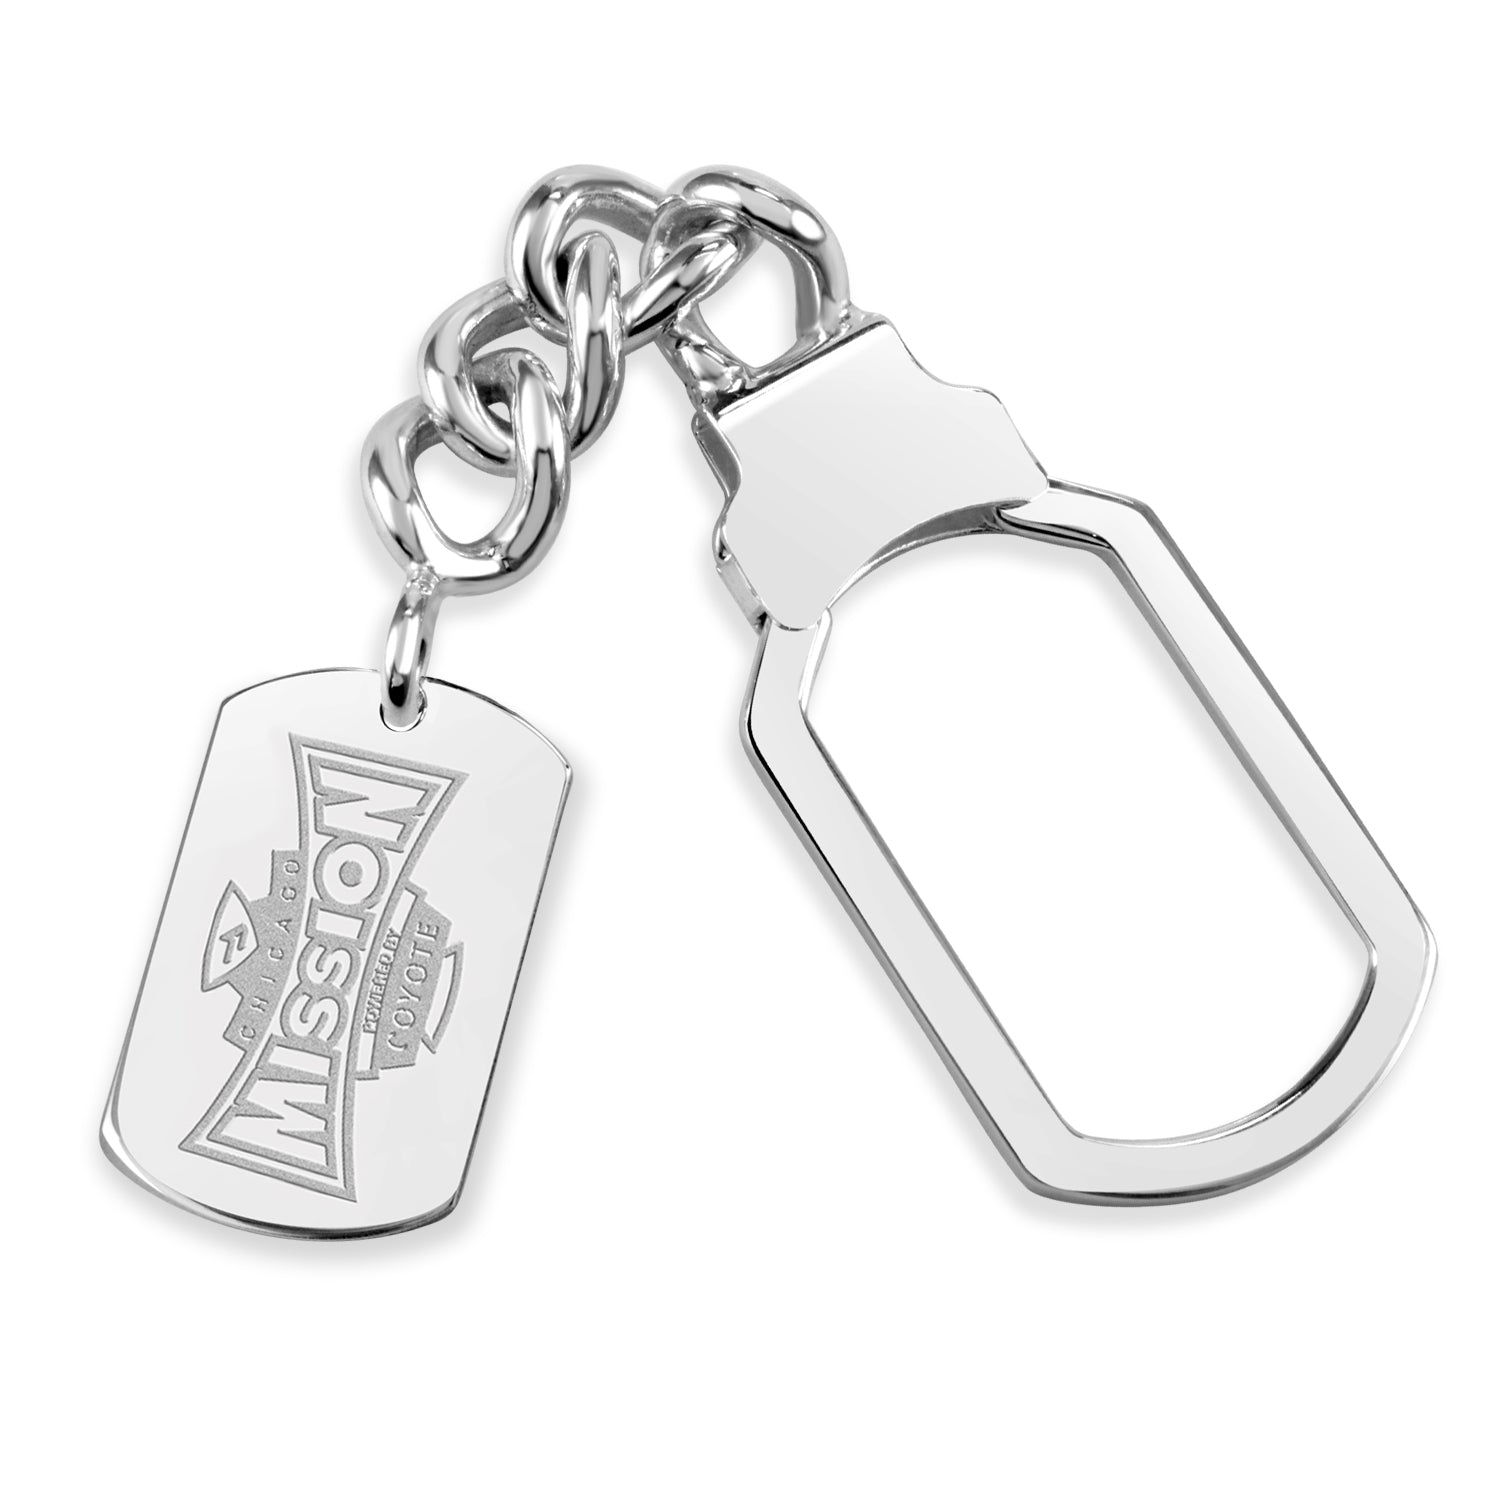 Chicago Mission Tension Lock Key Chain Tag